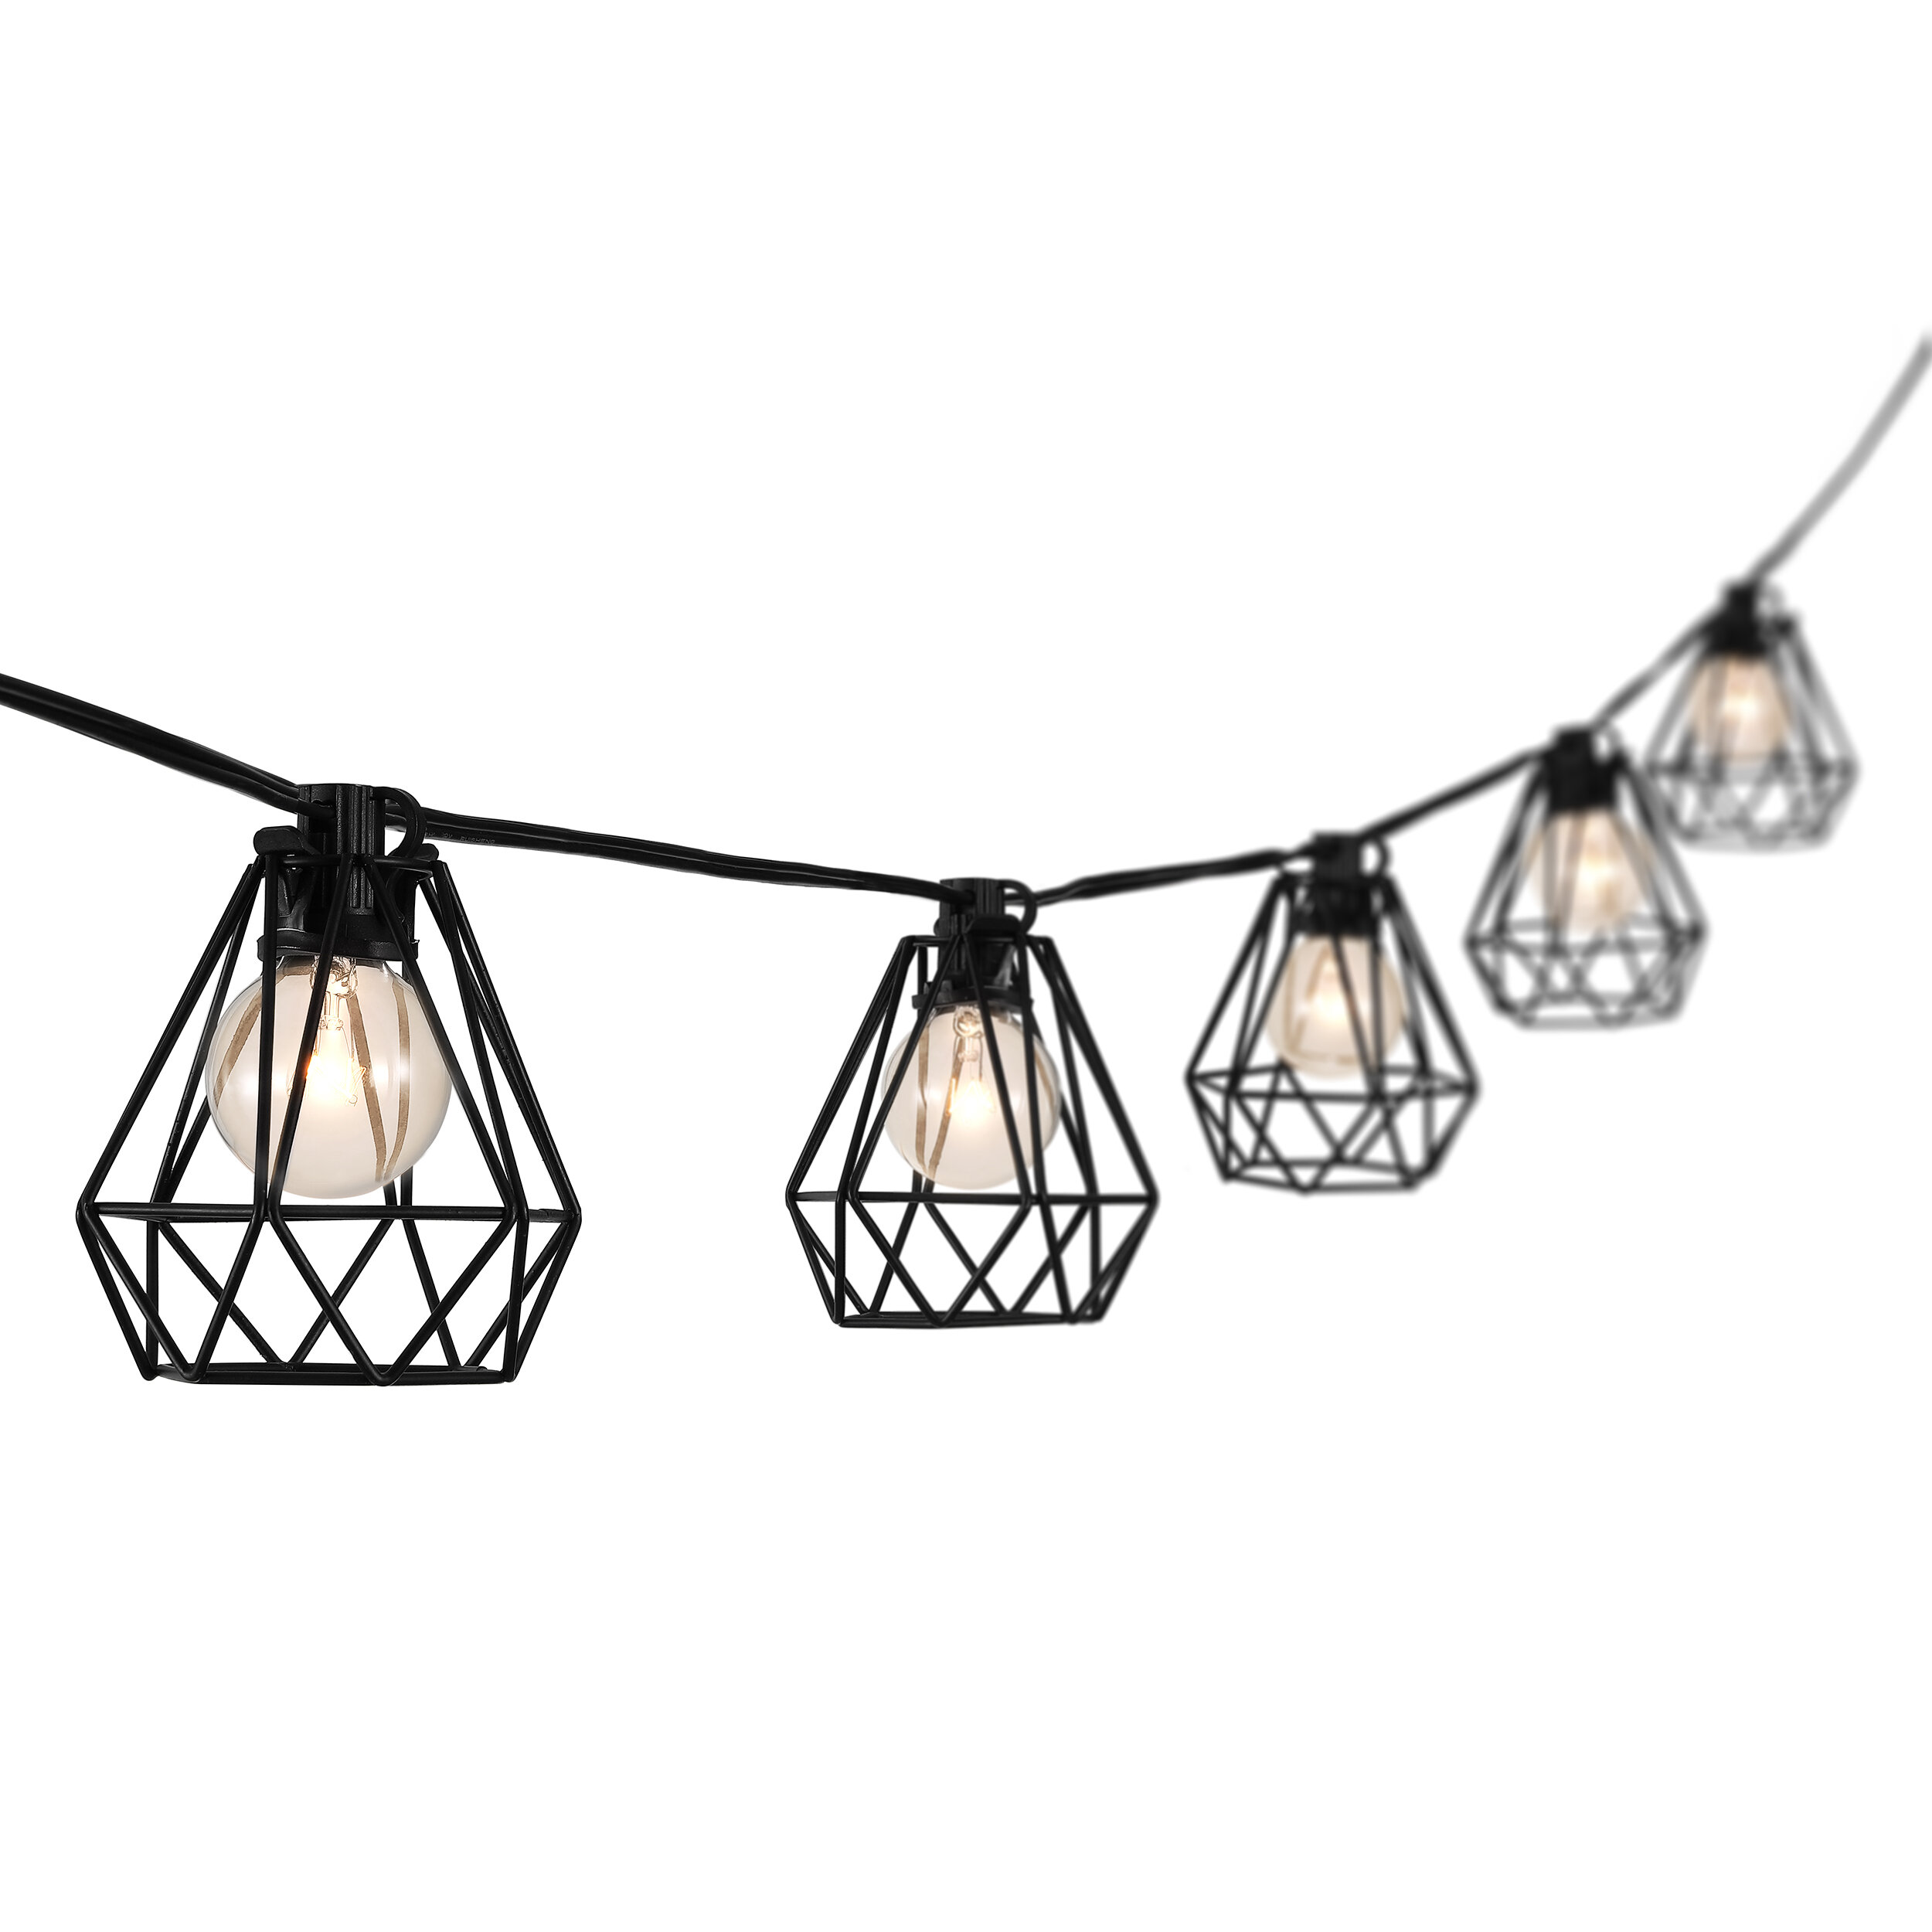 17 Stories Beaney Outdoor 10 - Bulb 10'' Plug-in Shaded String Light &  Reviews